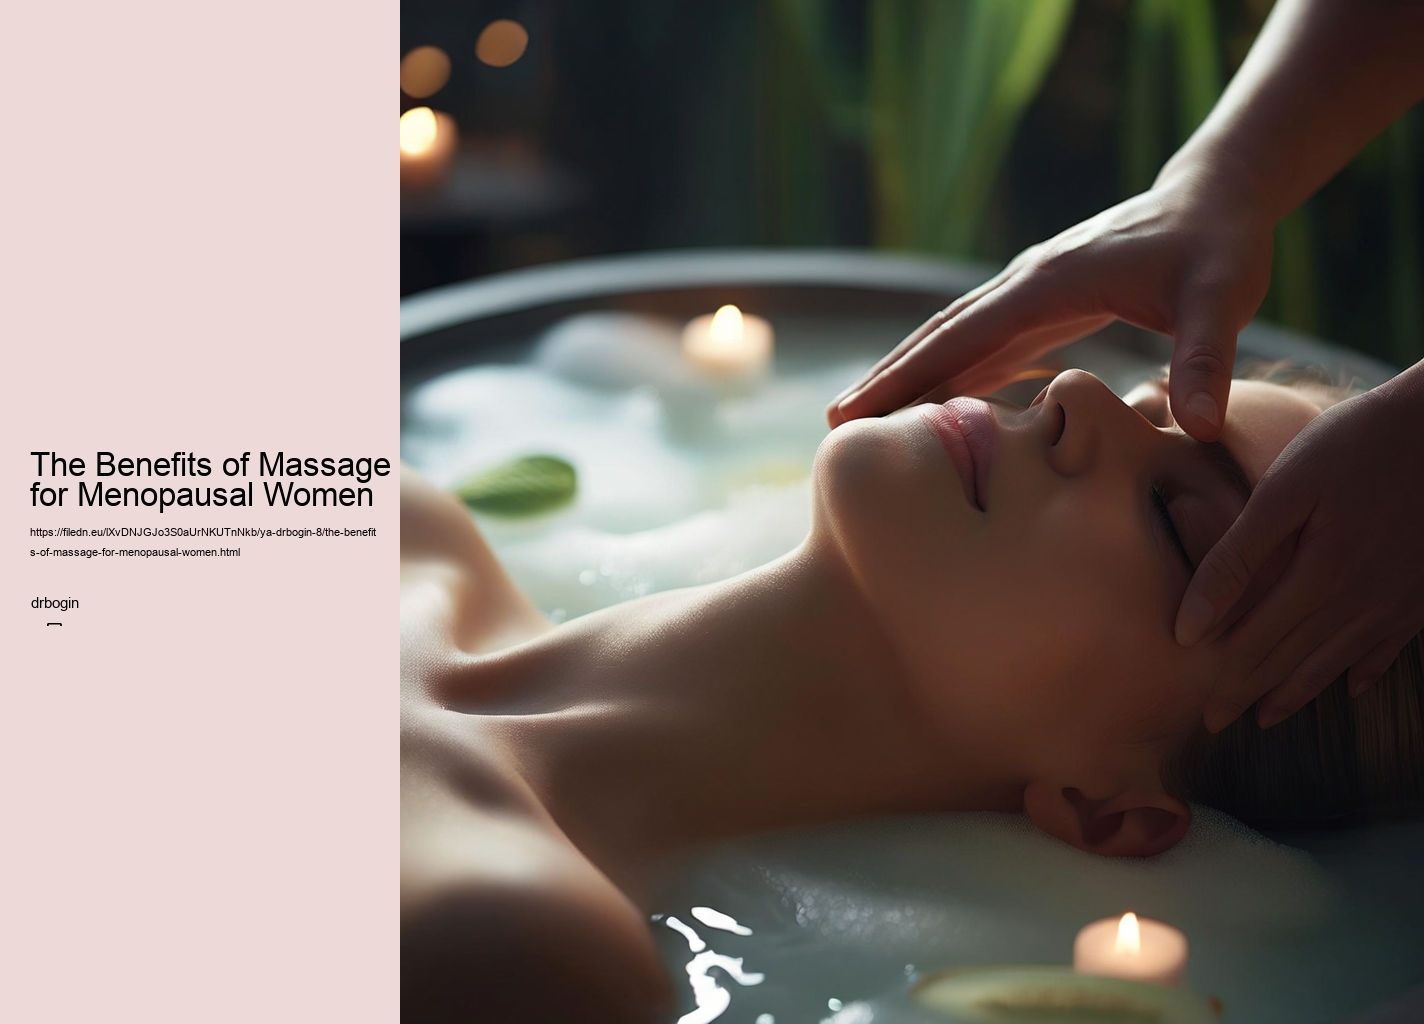 The Benefits of Massage for Menopausal Women